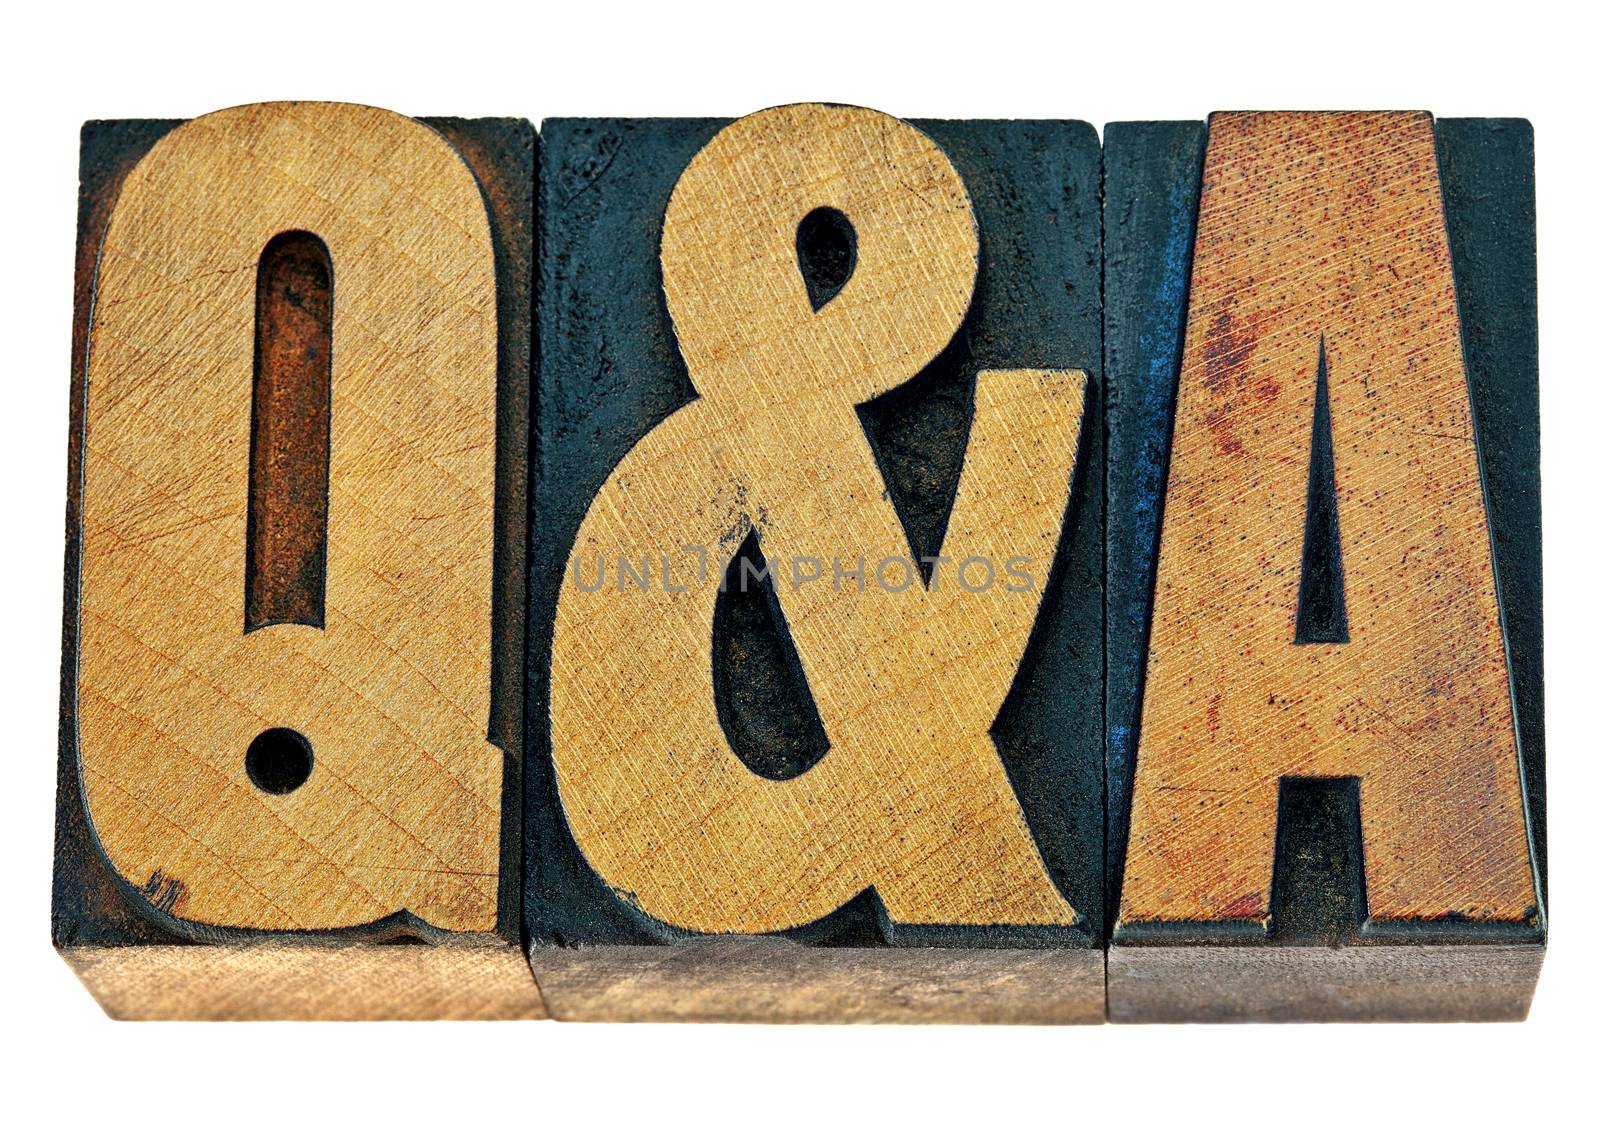 questions and answers - Q&A in wood type by PixelsAway